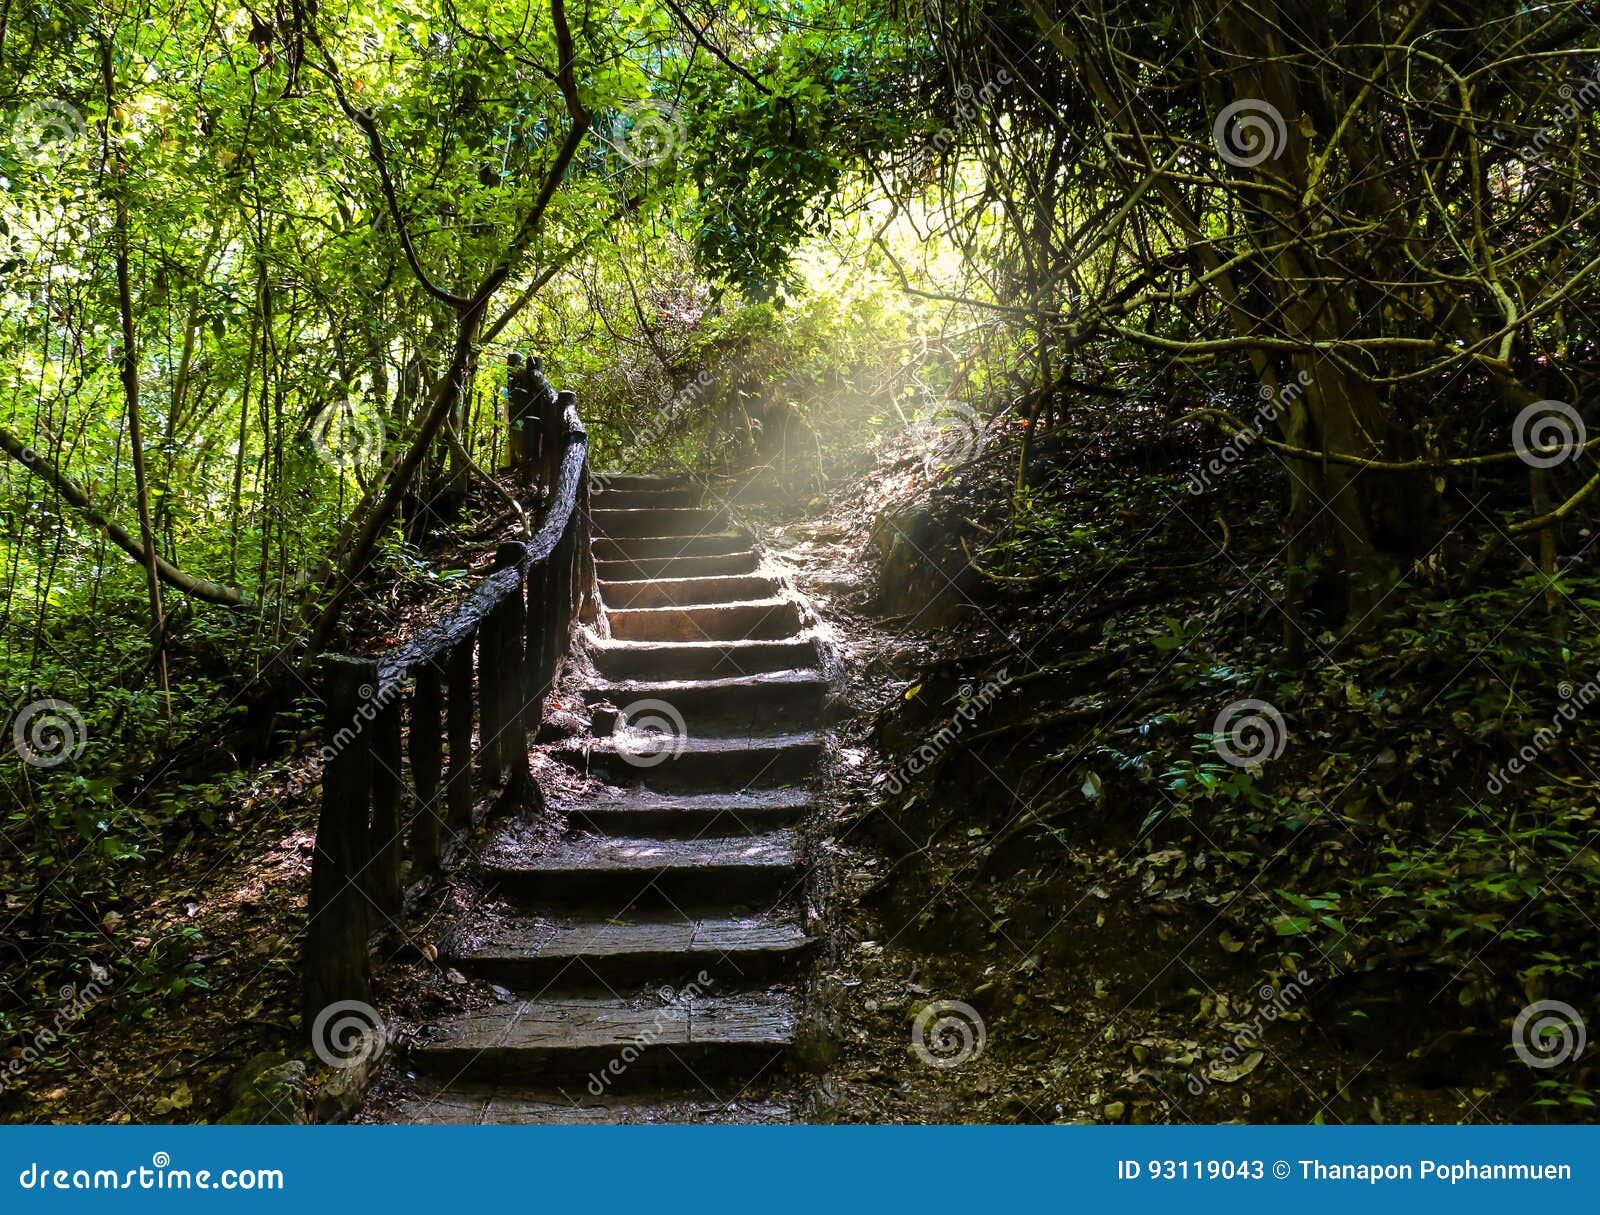 stairway pathway going a long way up to freshly green dense forest